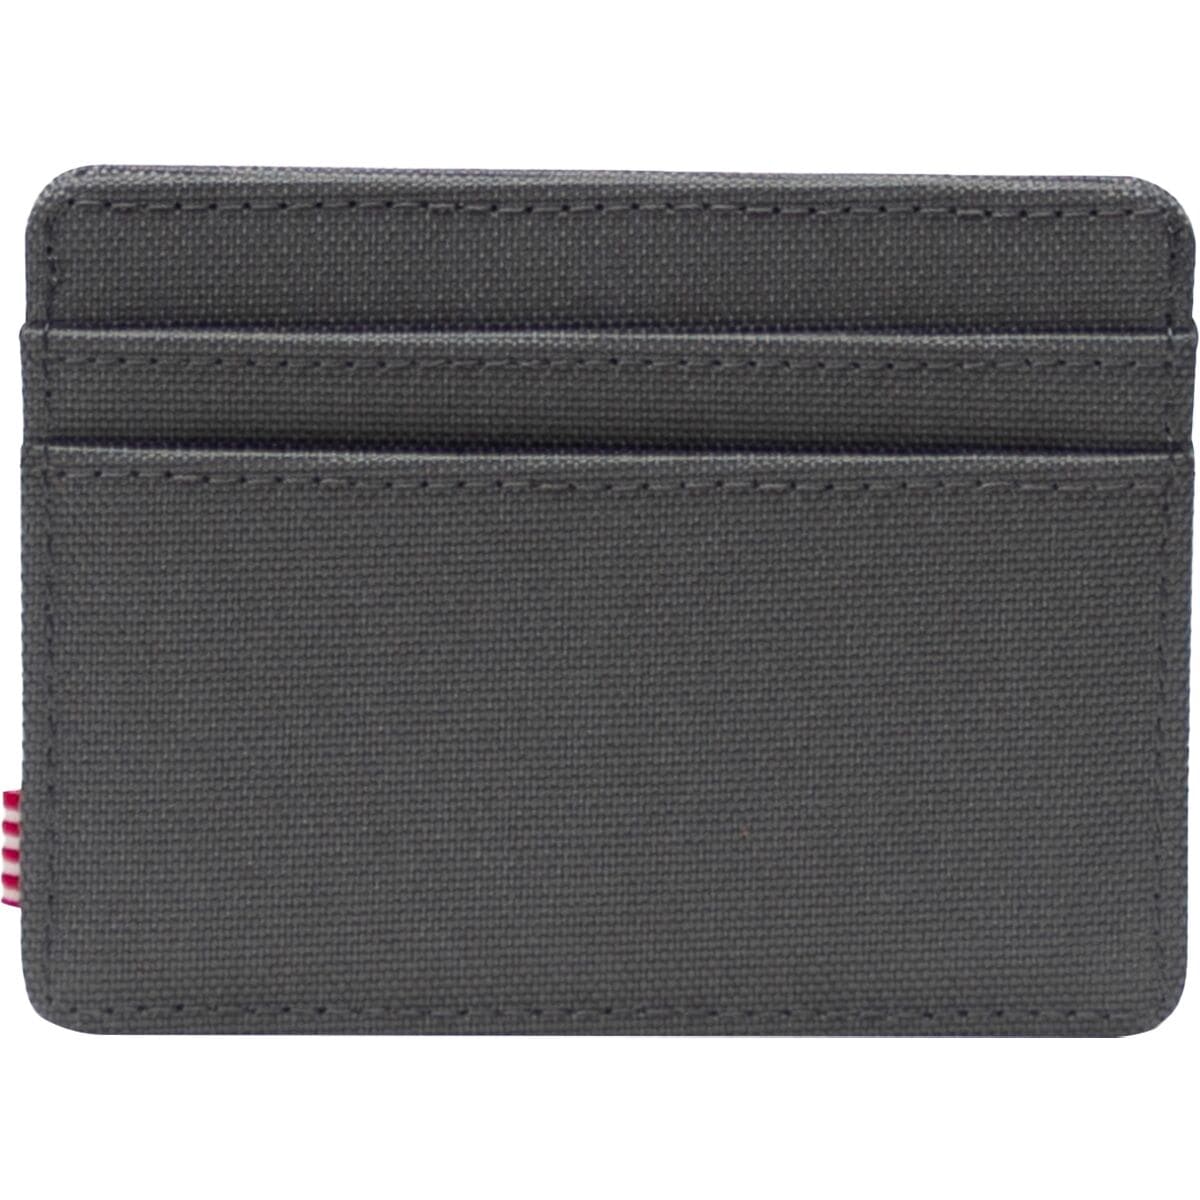 Small Wallet for Women Bifold Leather Mini Purse Credit Card Holder Short  Wallet | eBay